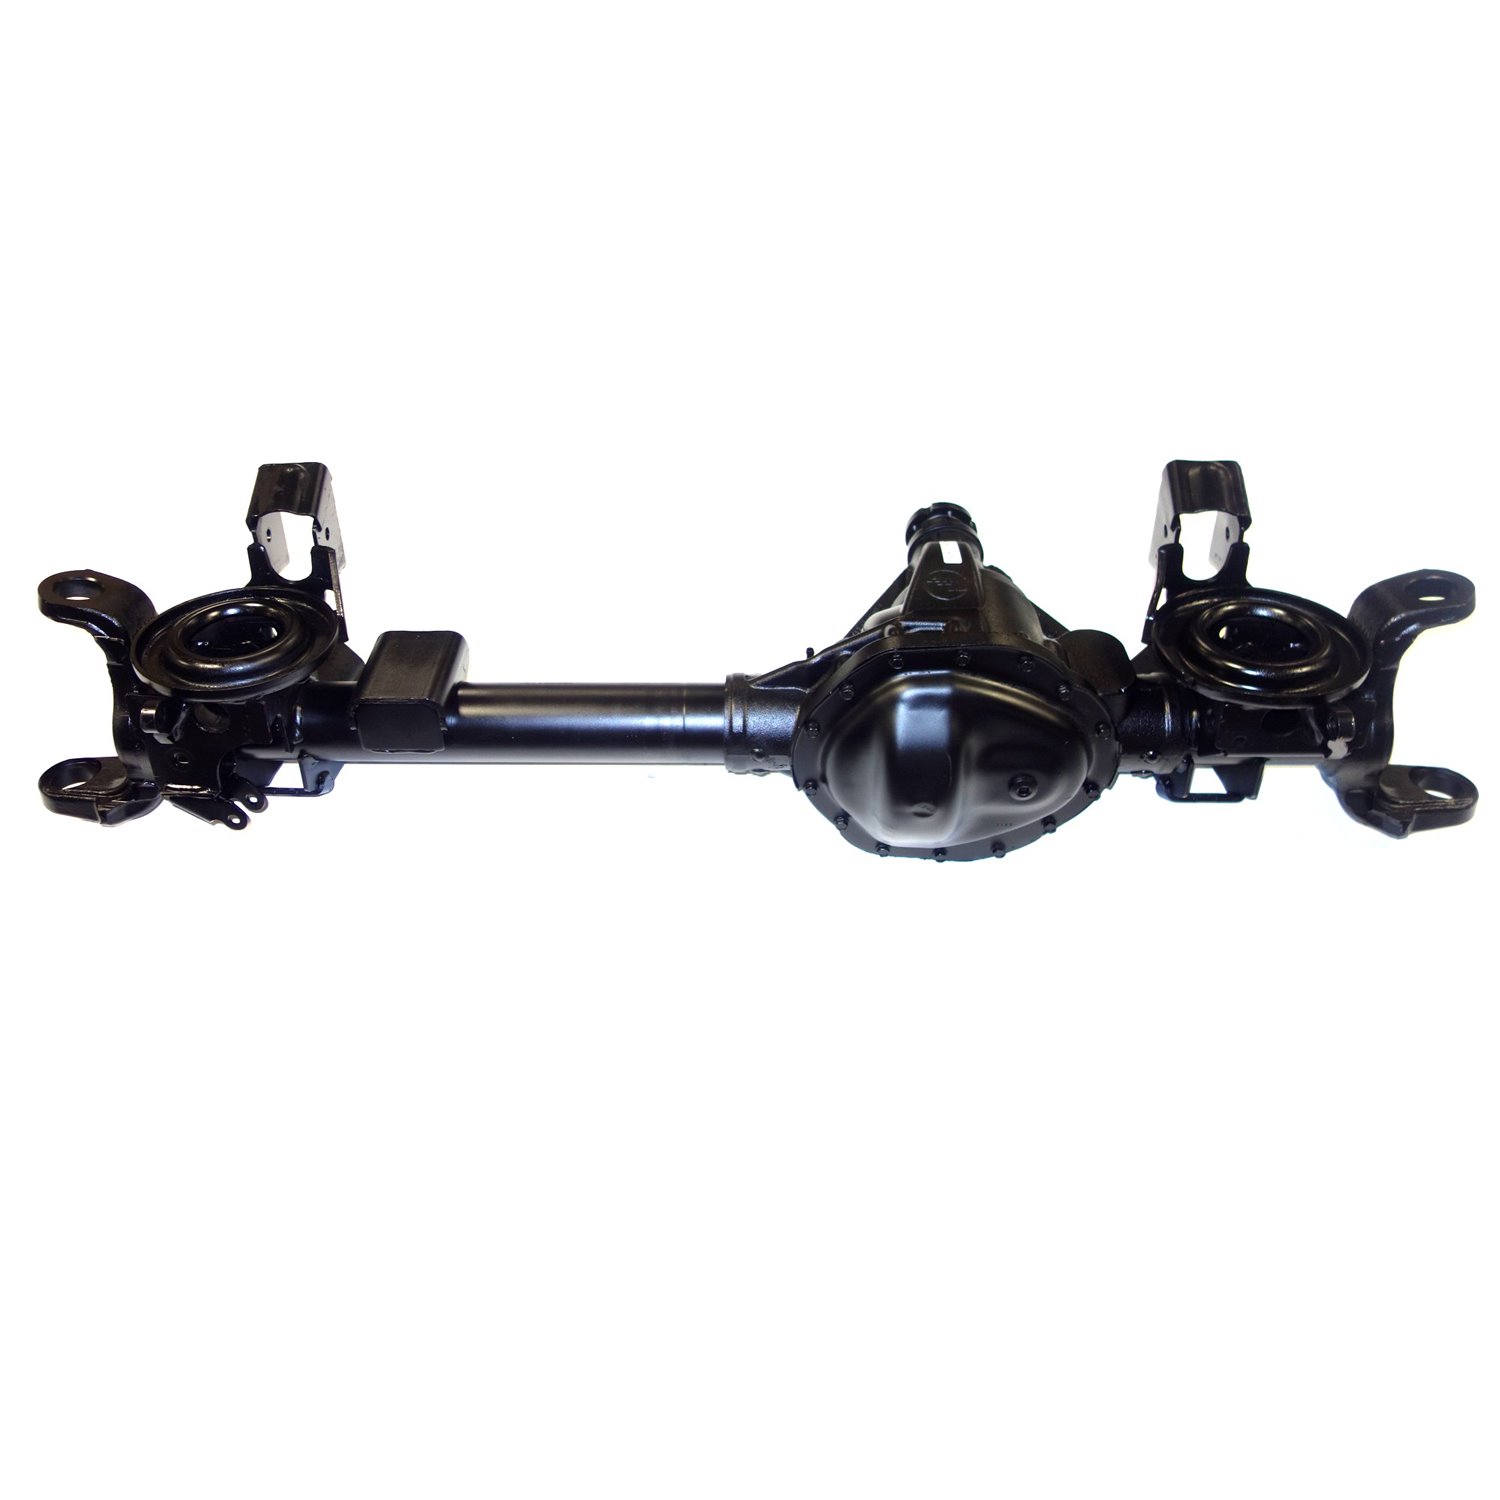 Remanufactured Complete Axle Assembly for Chy 9.25" Front 2009 Ram 1500 4.11